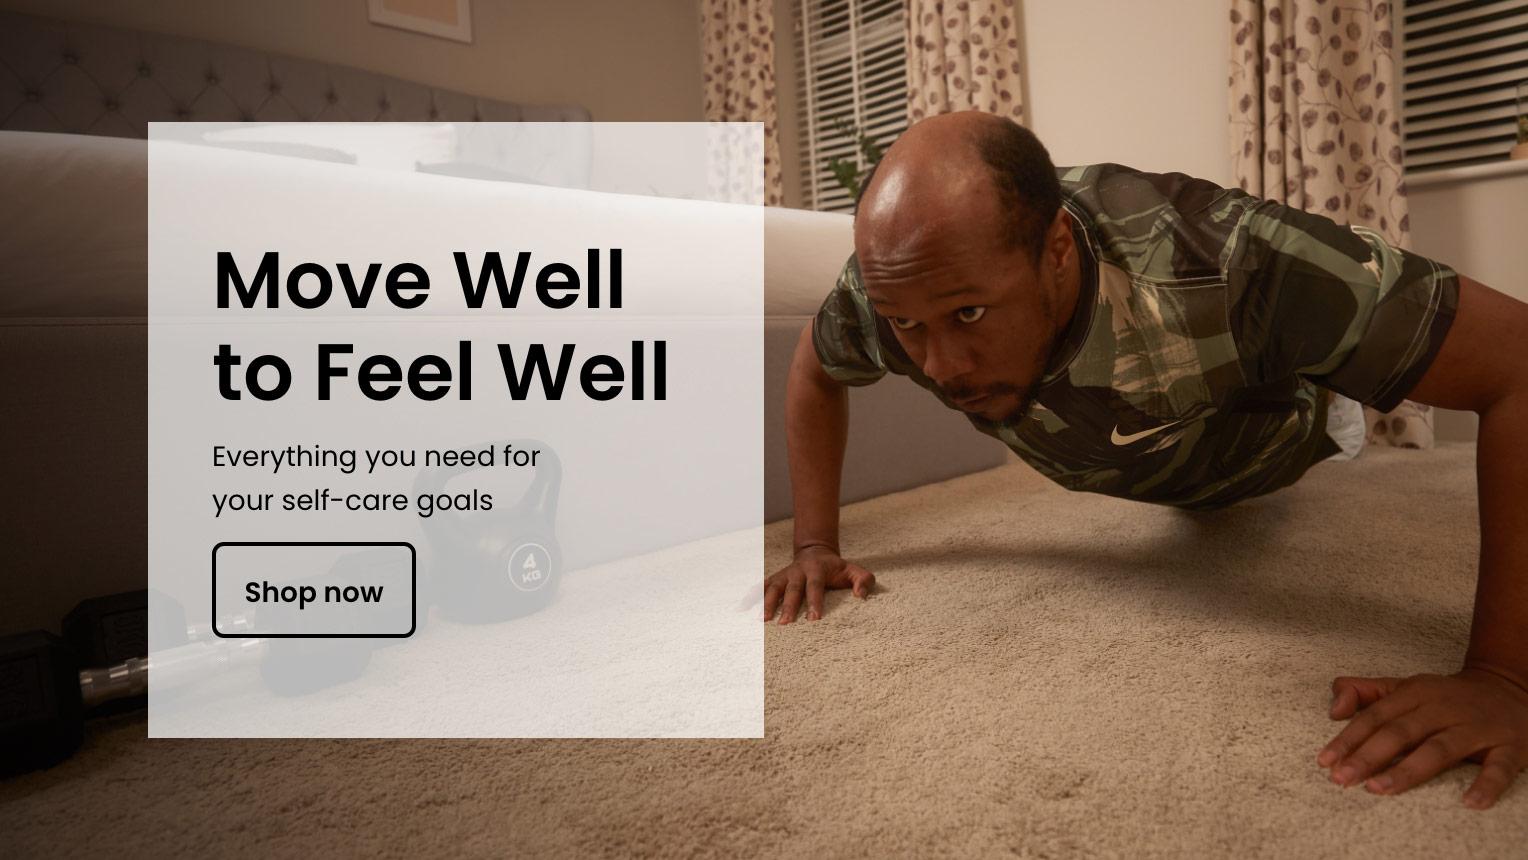 Move Well to Feel Well. Everything you need for your self-care goals. Shop now.